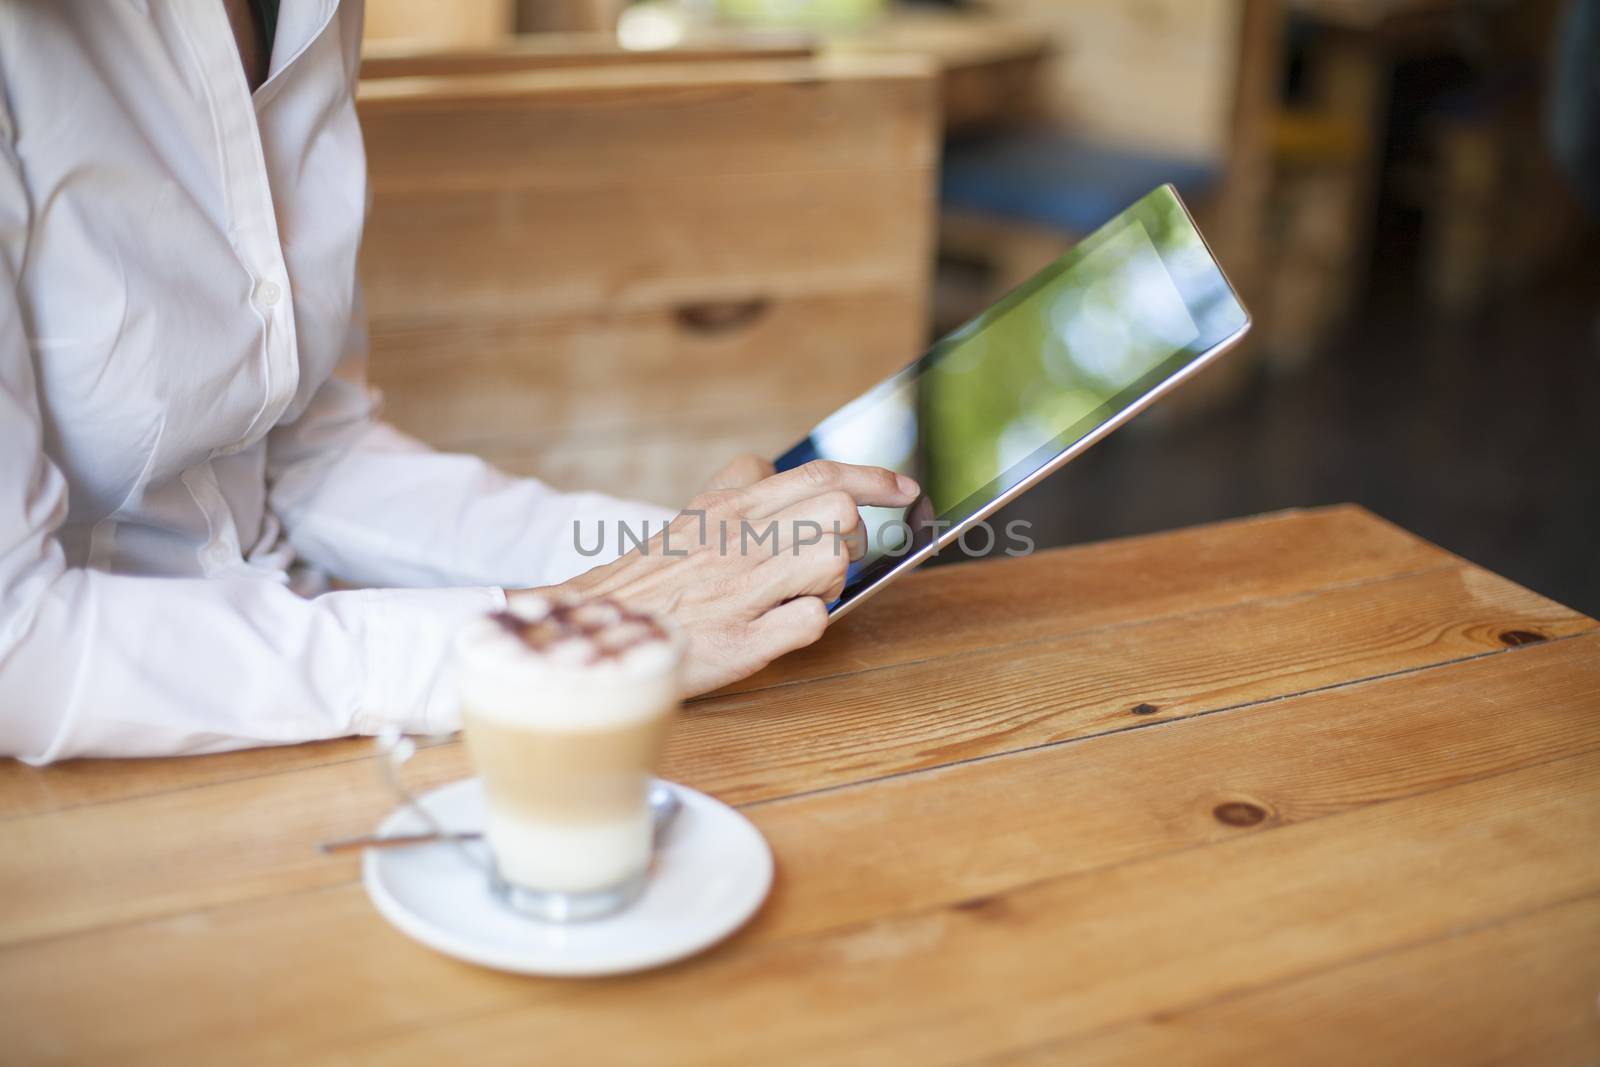 woman touching digital tablet blank screen with cappuccino coffee cup on light brown wooden table cafe